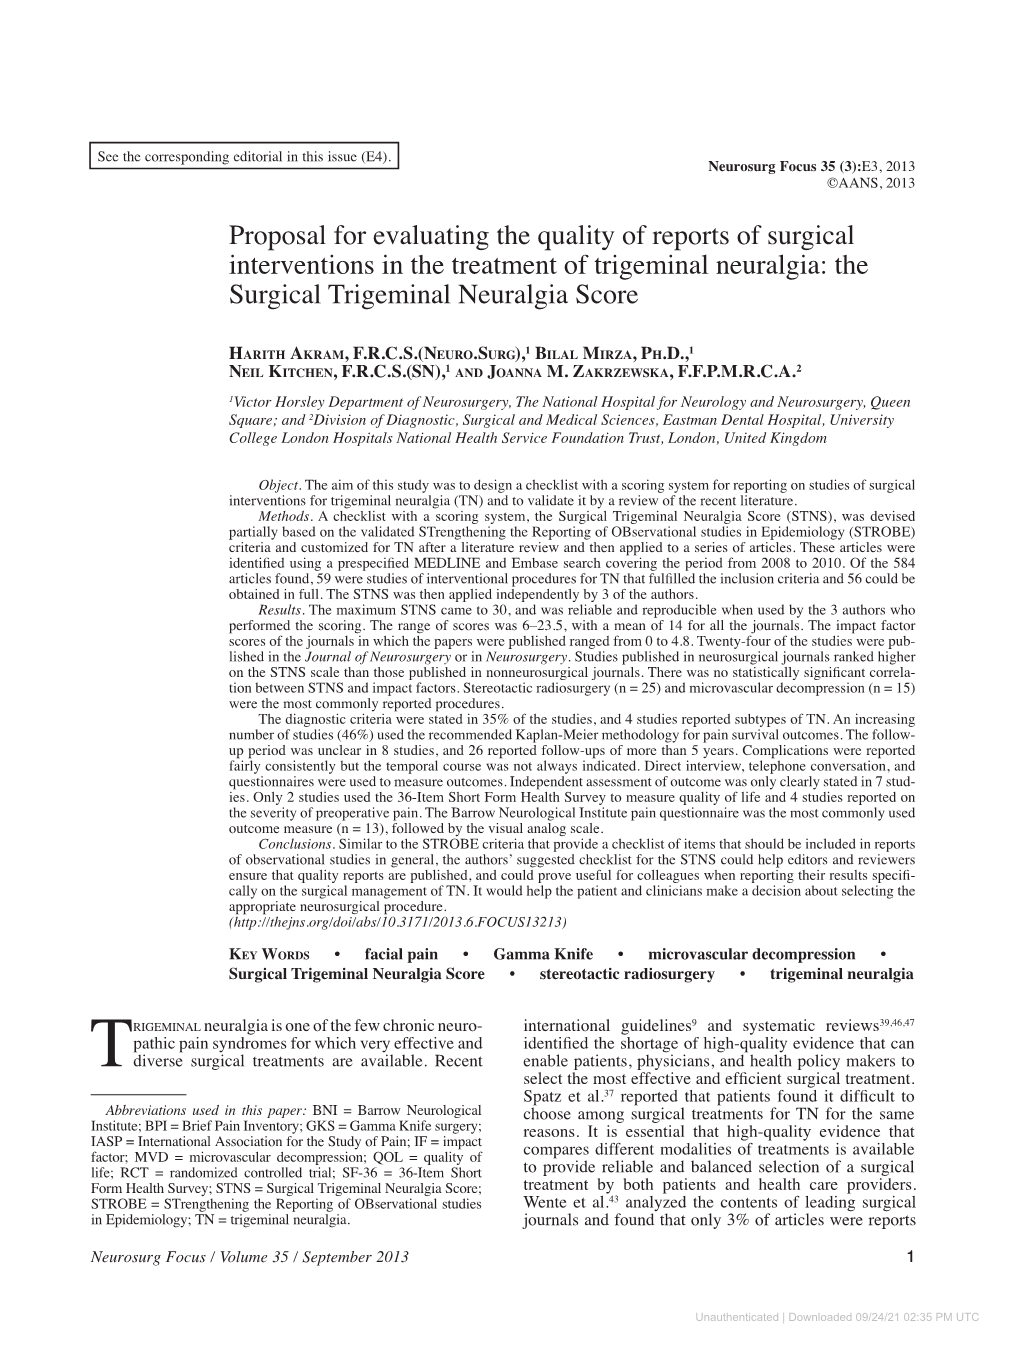 Proposal for Evaluating the Quality of Reports of Surgical Interventions in the Treatment of Trigeminal Neuralgia: the Surgical Trigeminal Neuralgia Score